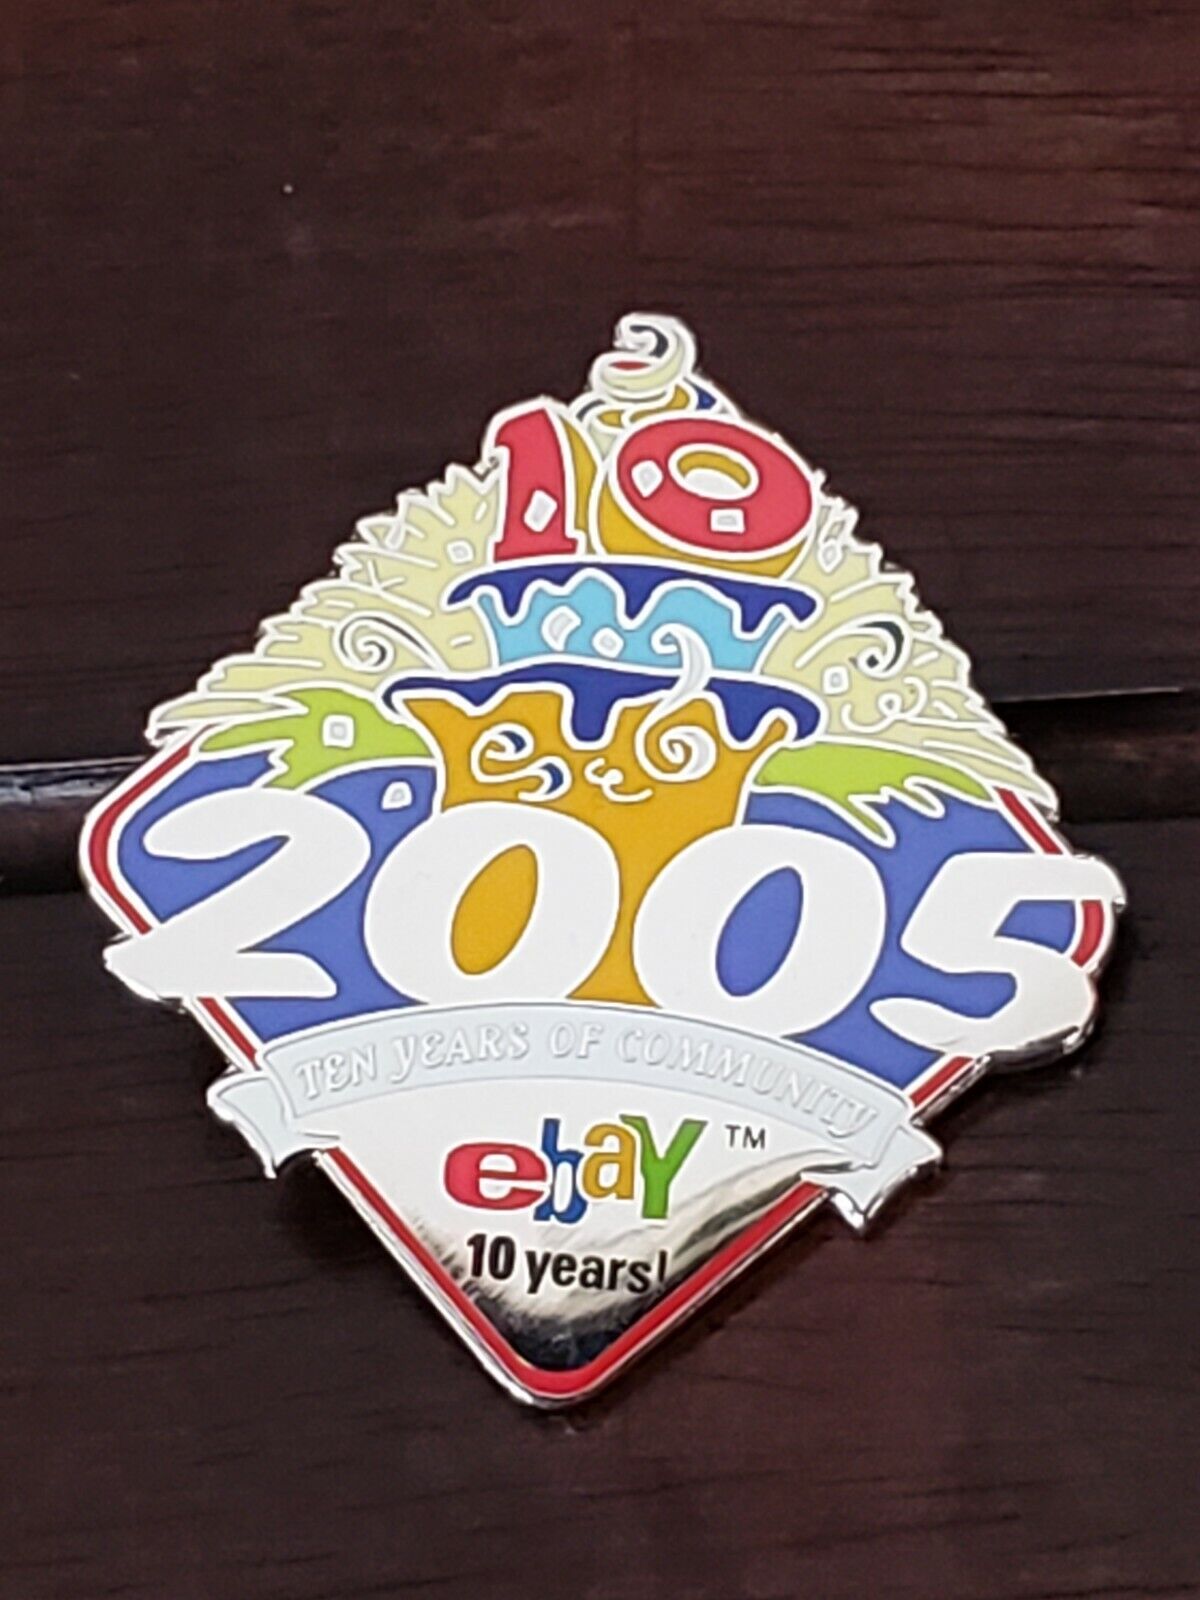 2005 eBay lapel hat pin 10 YEARS OF COMMUNITY collector's pin